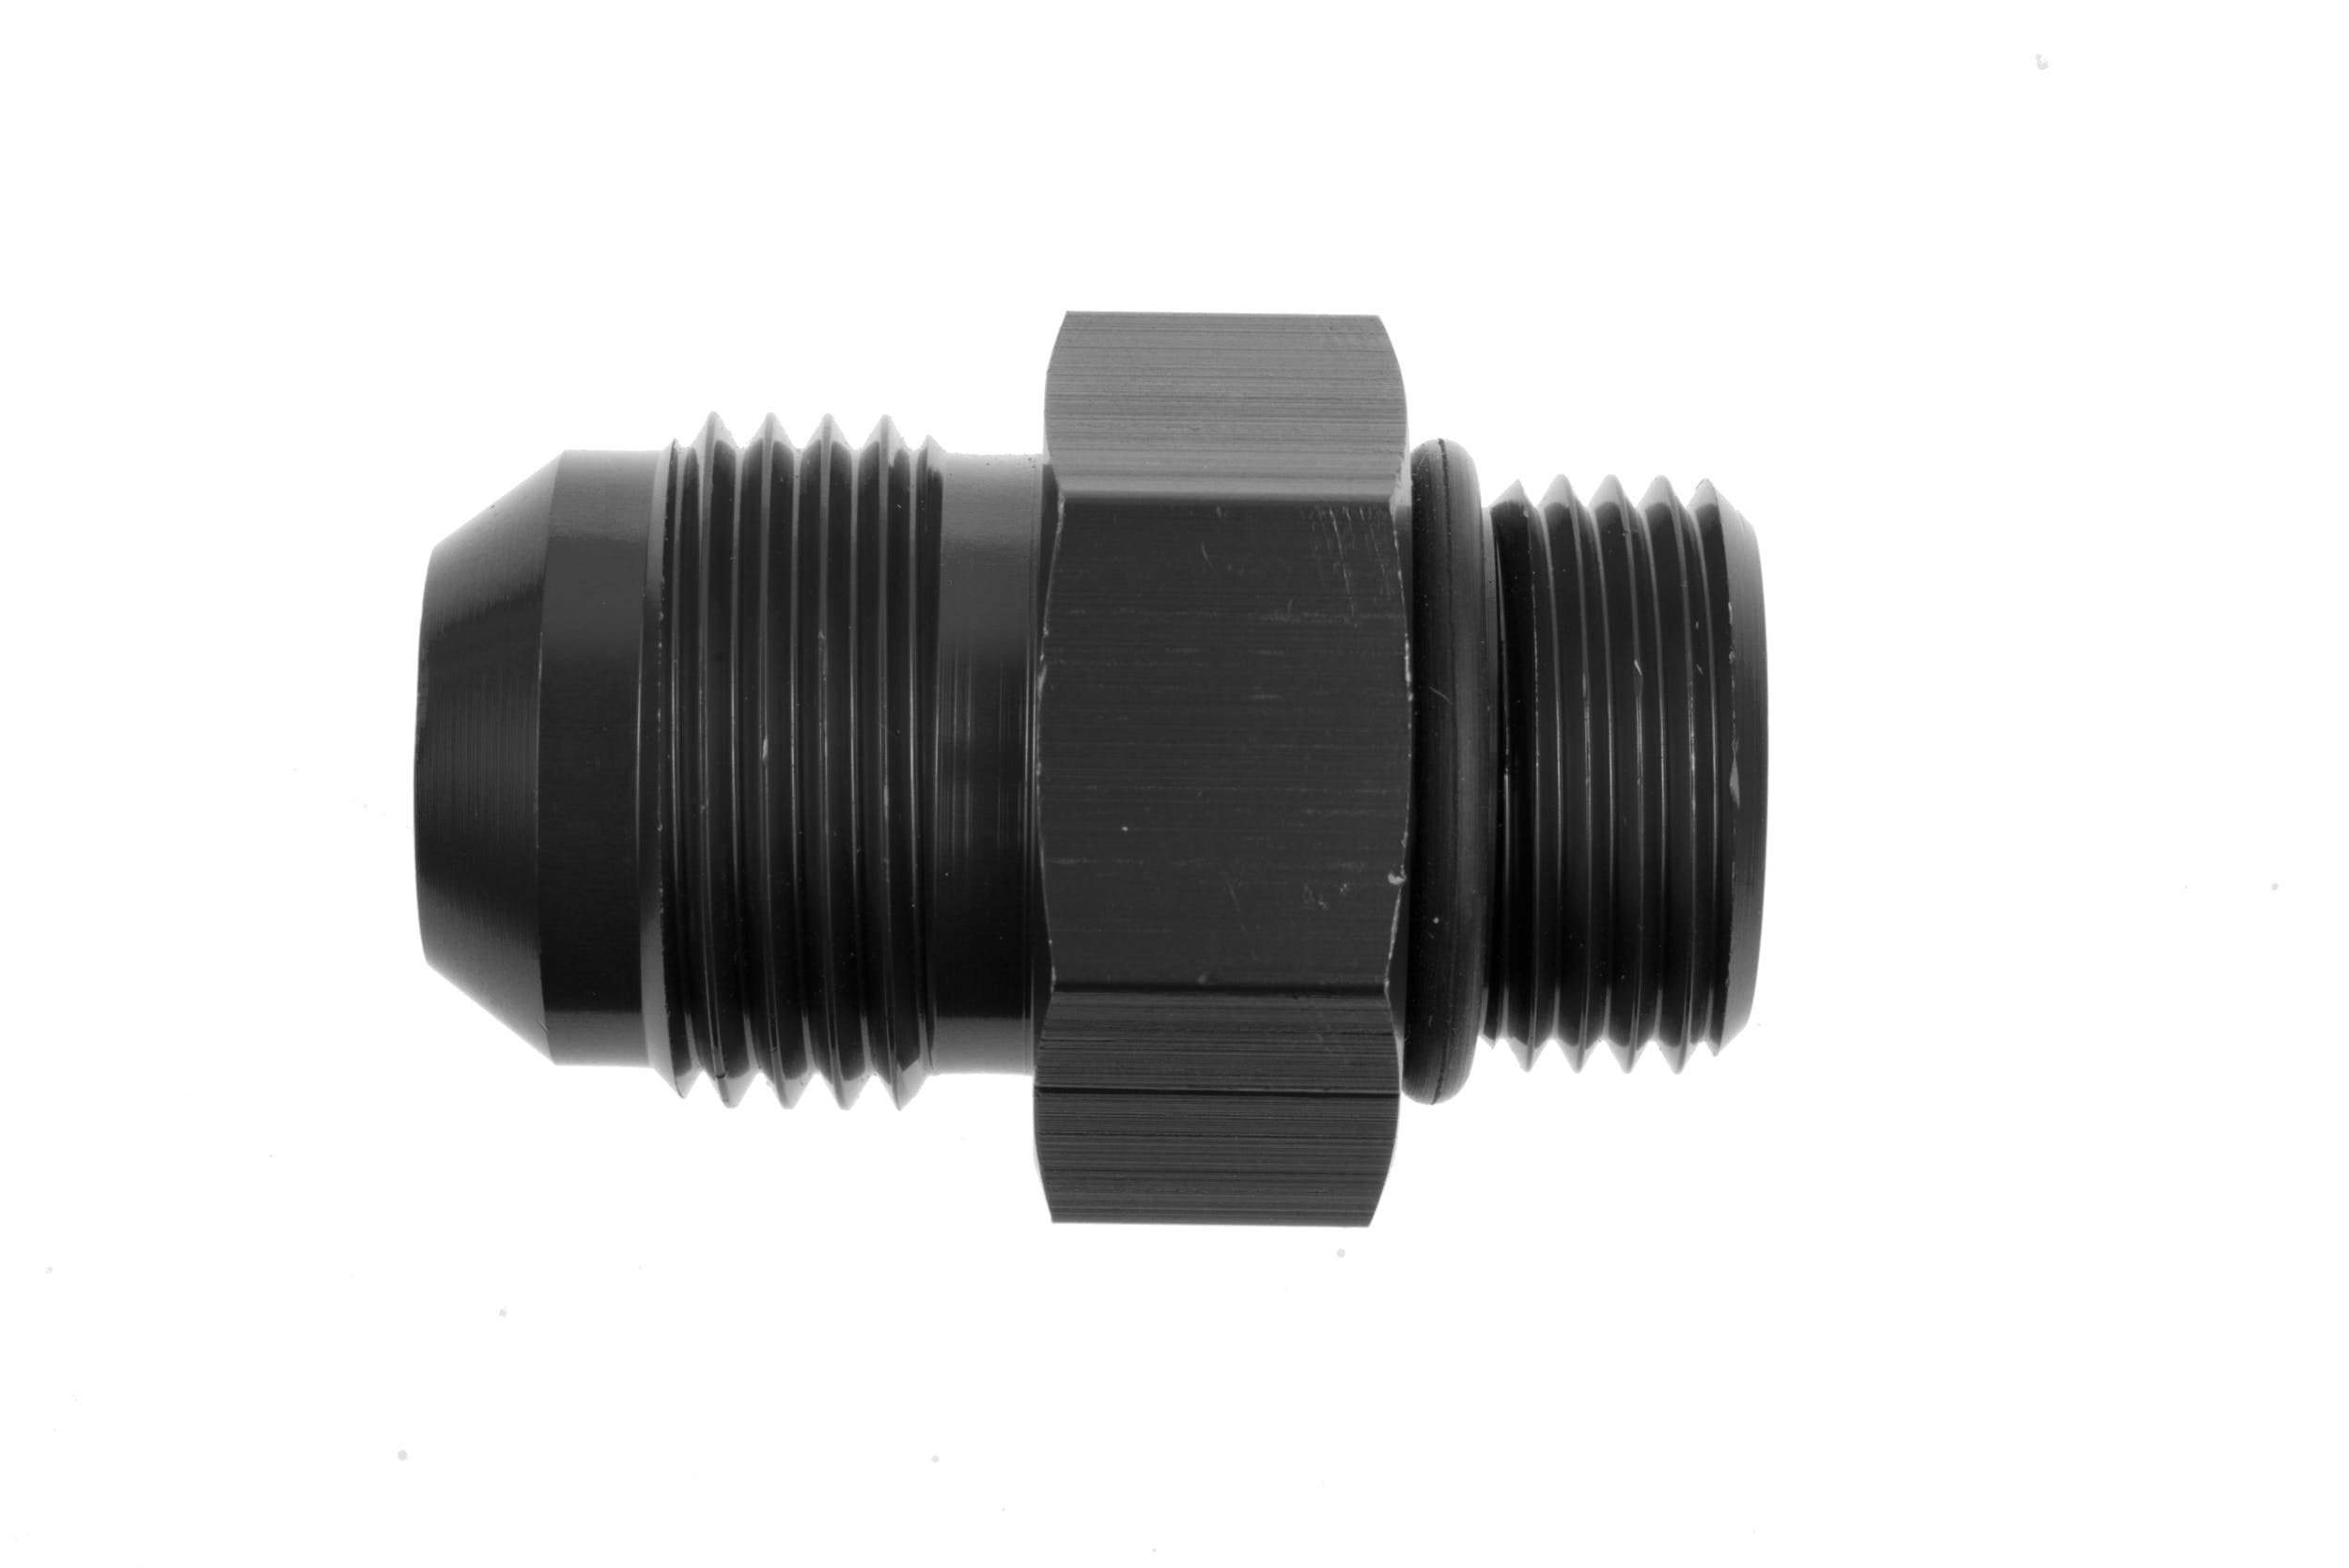 Redhorse Performance 920-08-10-2 -08 Male to -10 o-ring port adapter (high flow radius ORB) - black